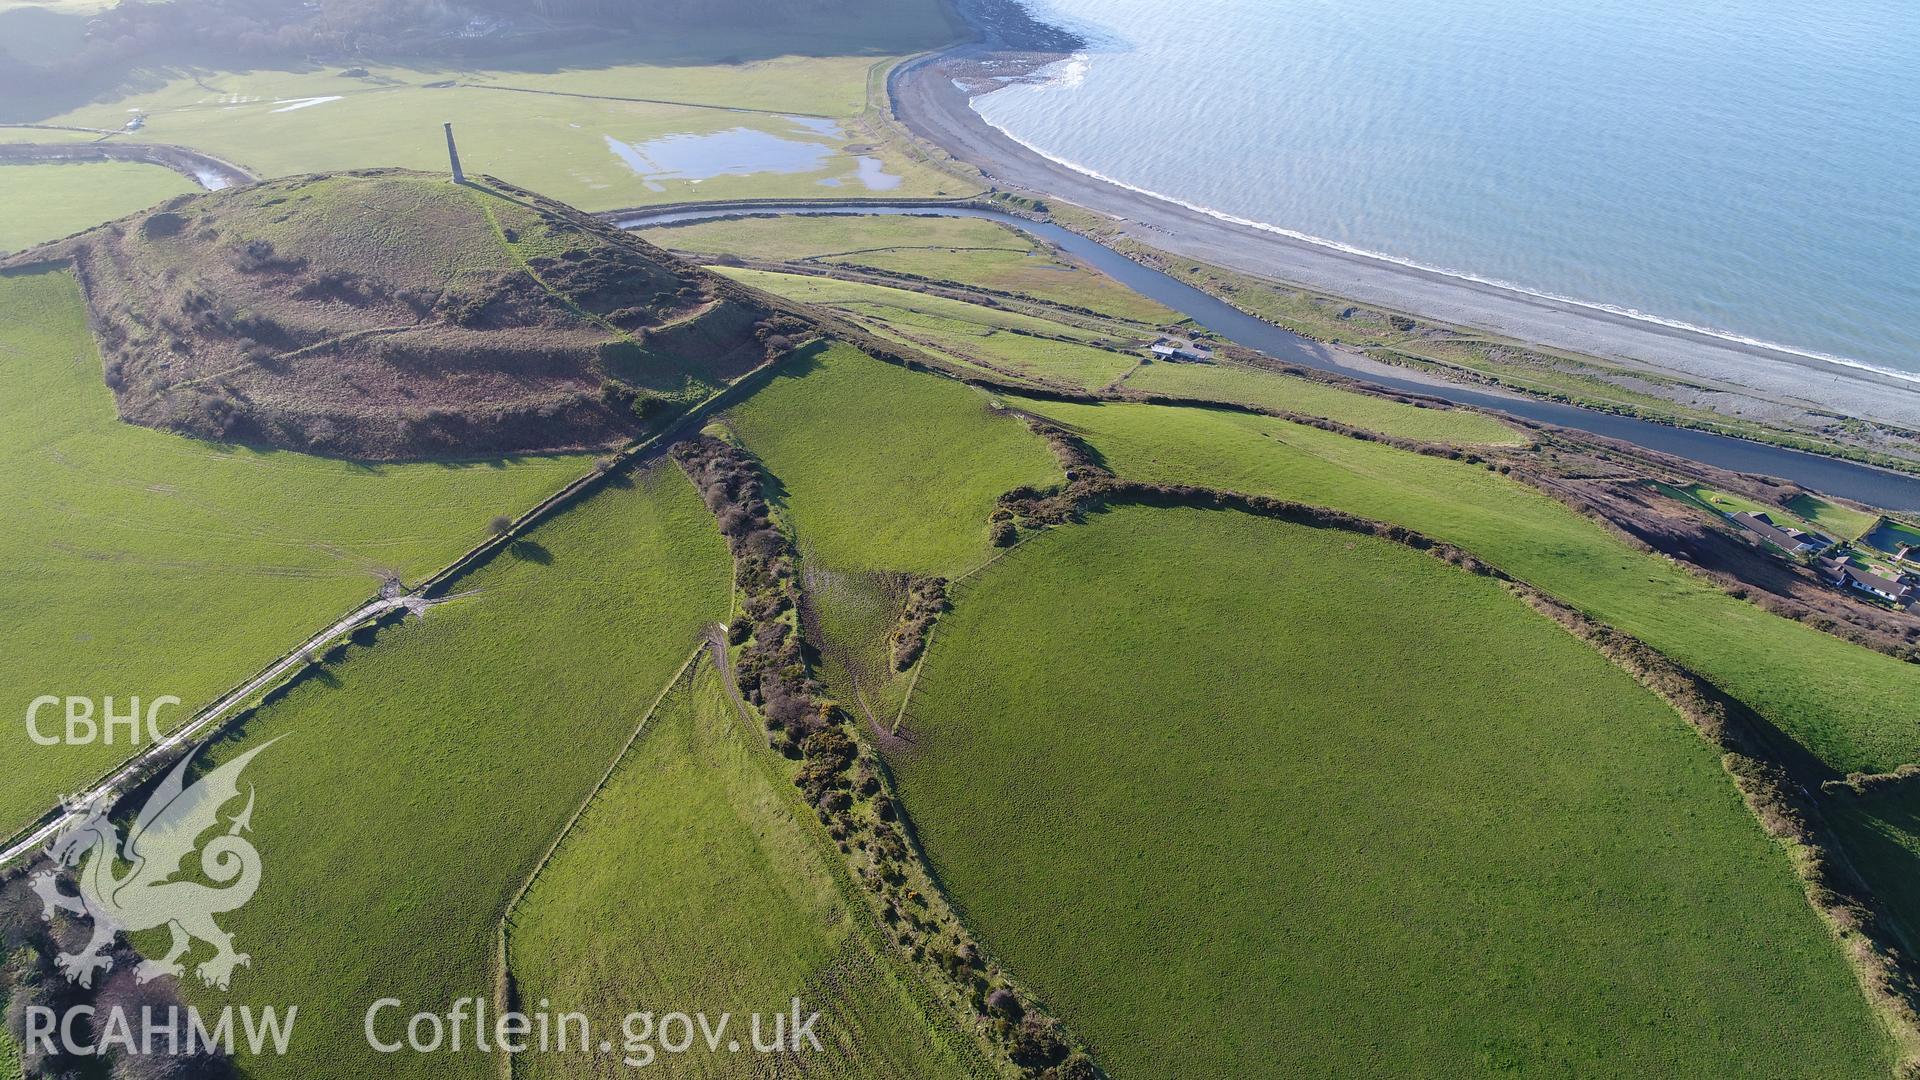 View of Pen Dinas hillfort from the north-east. CHERISH Project DJI drone photo survey of Pen Dinas Hillfort and the Wellington Monument. ? Crown: CHERISH PROJECT 2017. Produced with EU funds through the Ireland Wales Co-operation Programme 2014-2020. All material made freely available through the Open Government Licence.